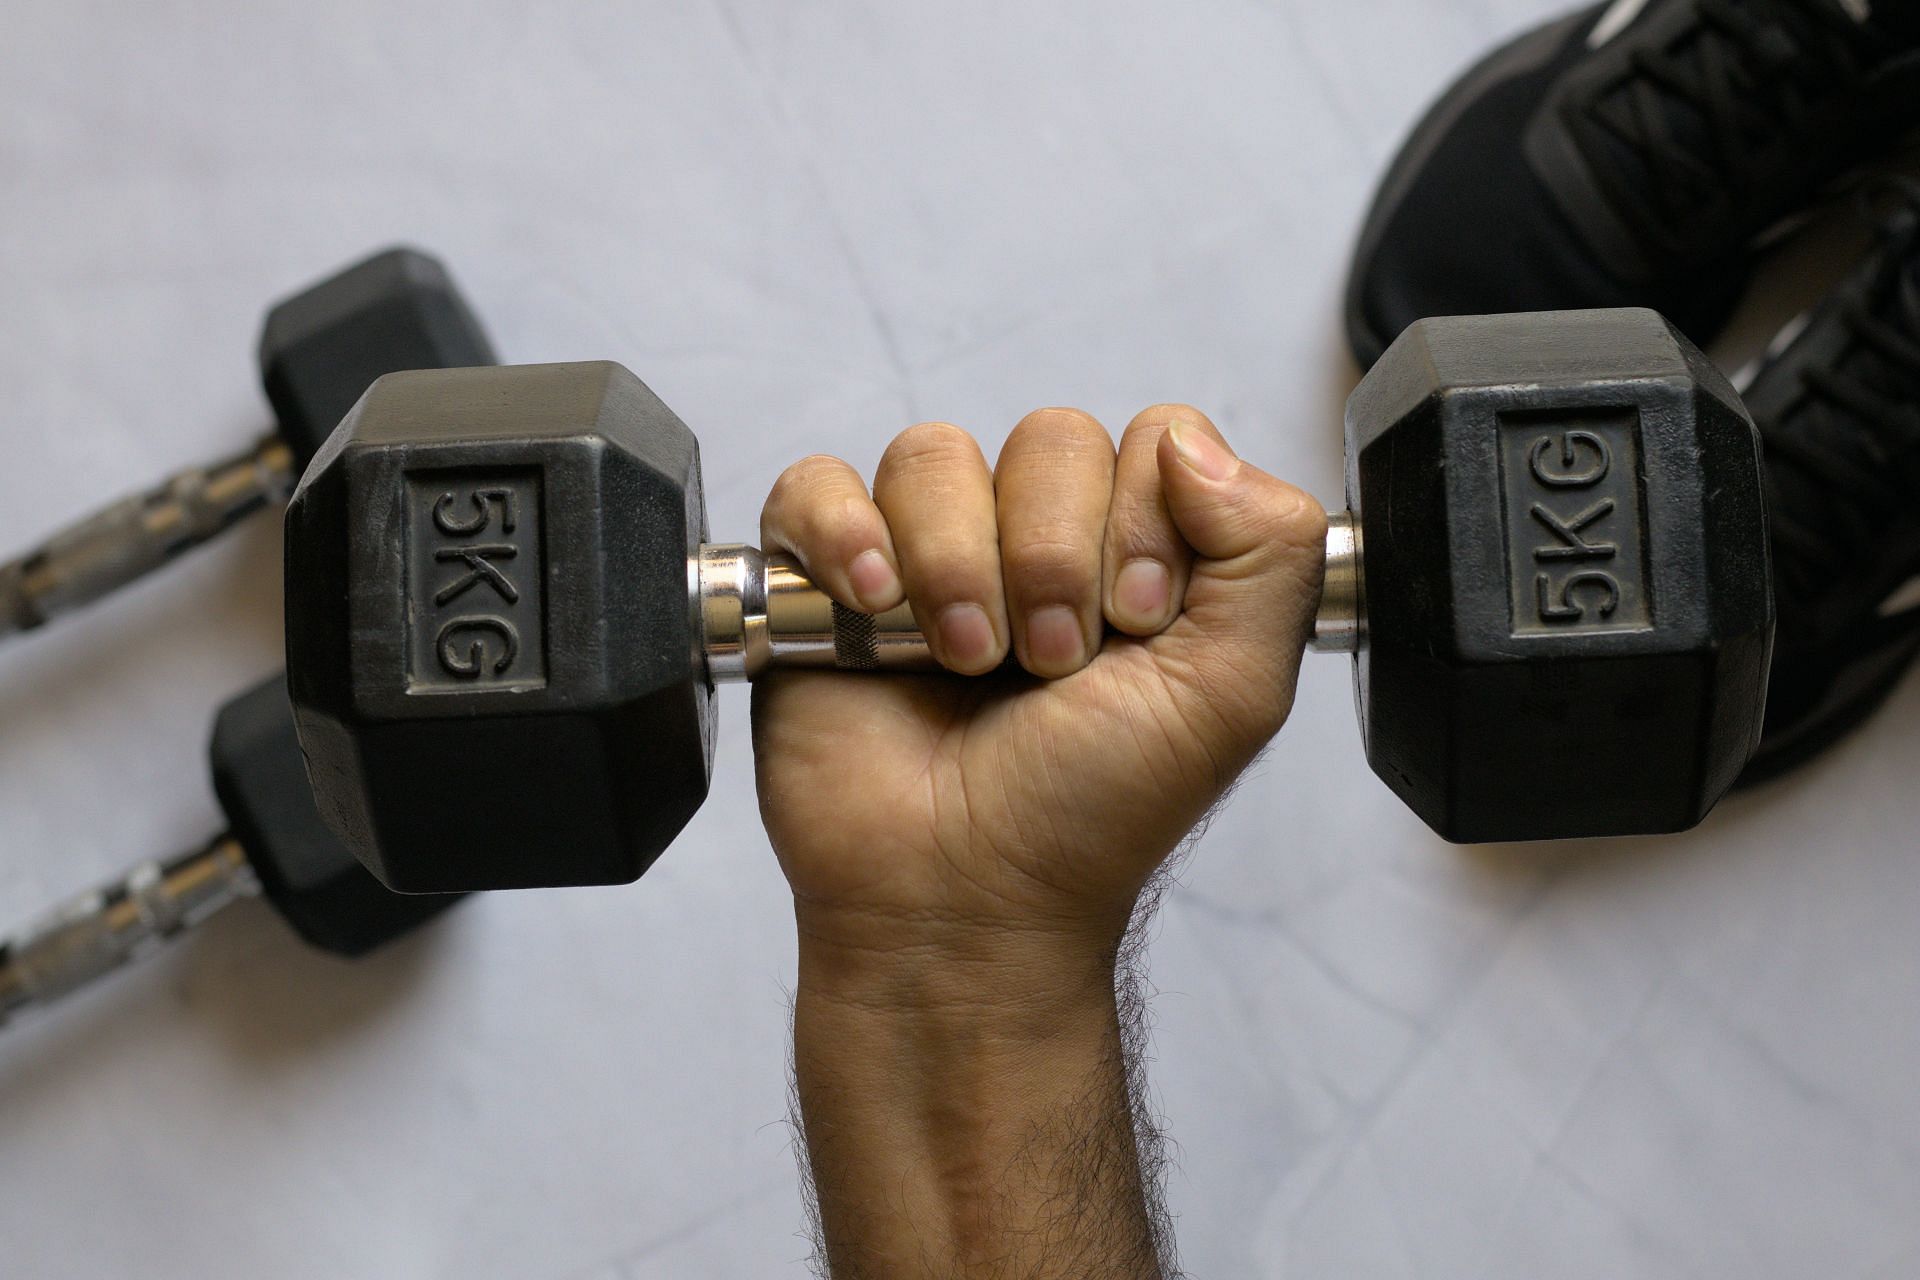 5 Exercises To Strengthen Your Wrists Using Wrist Weights